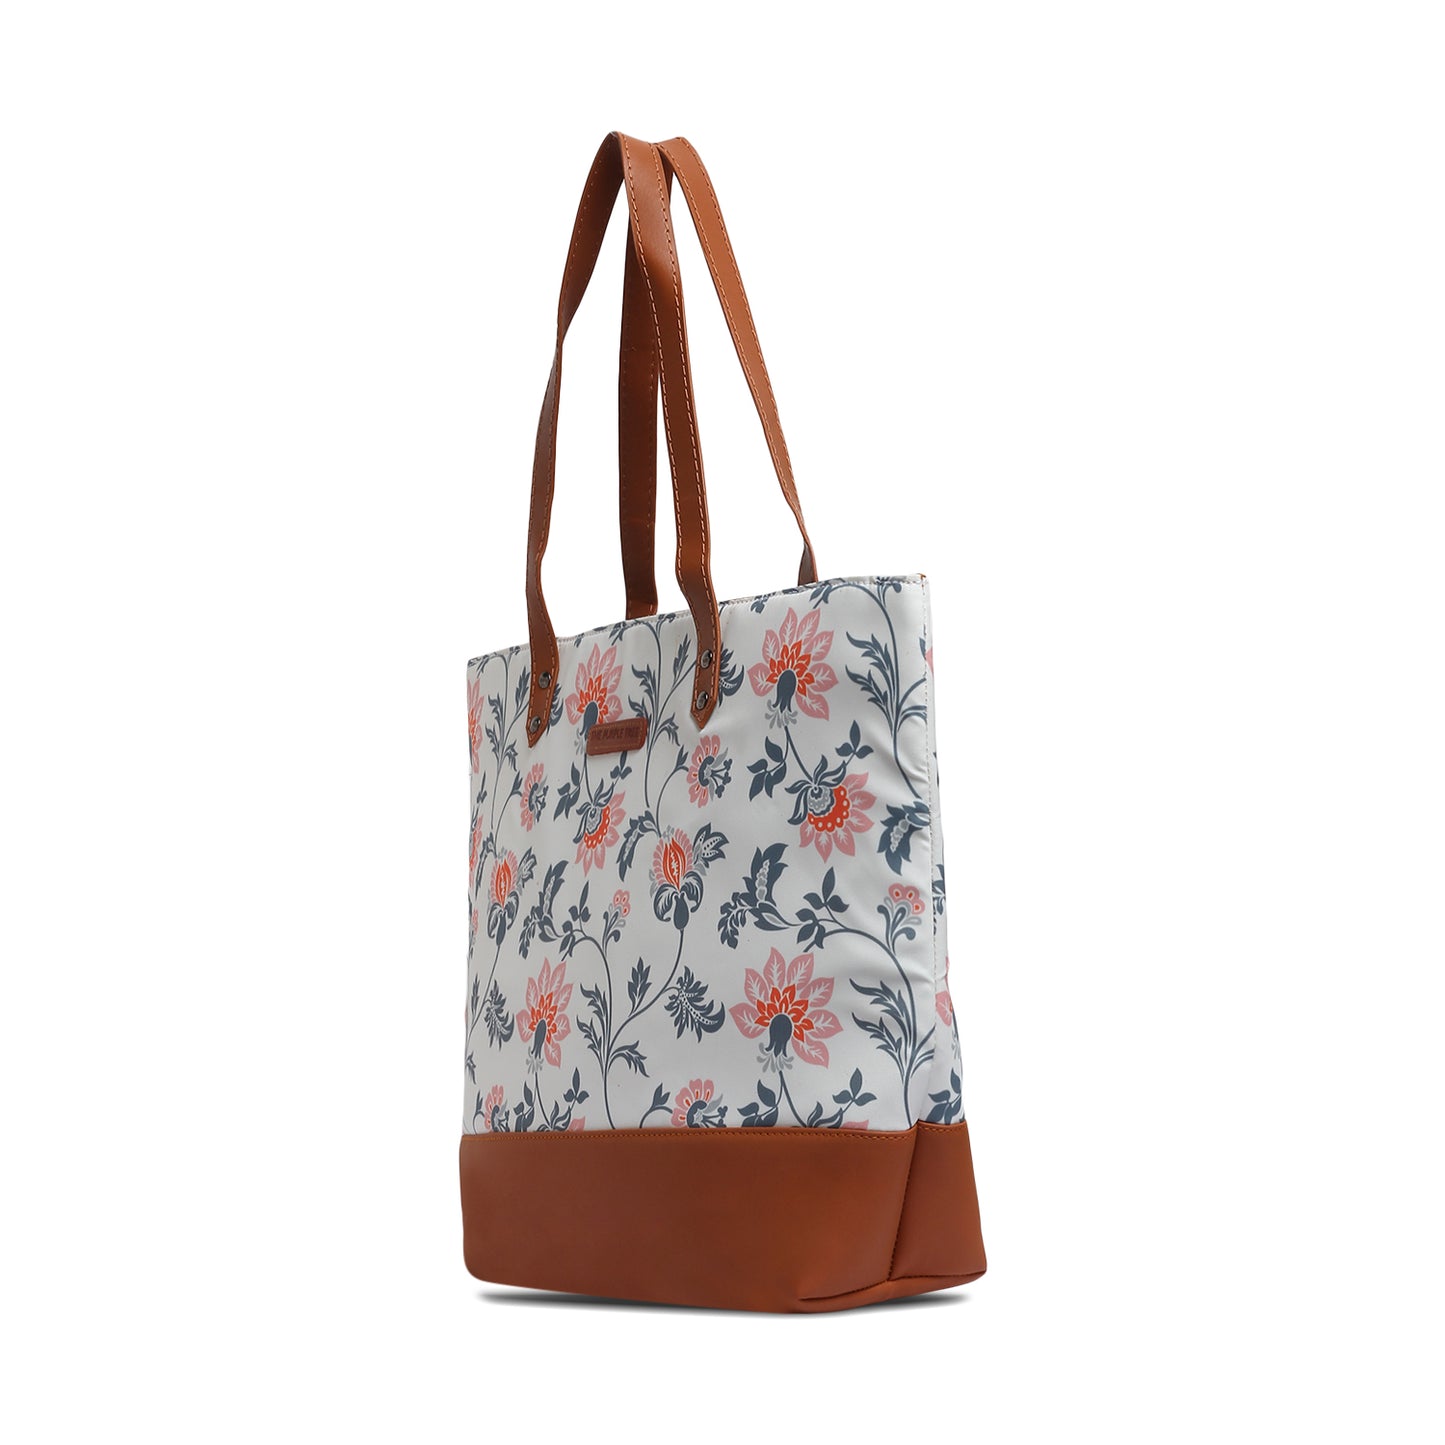 Delilah Leather Tote Bag For Women